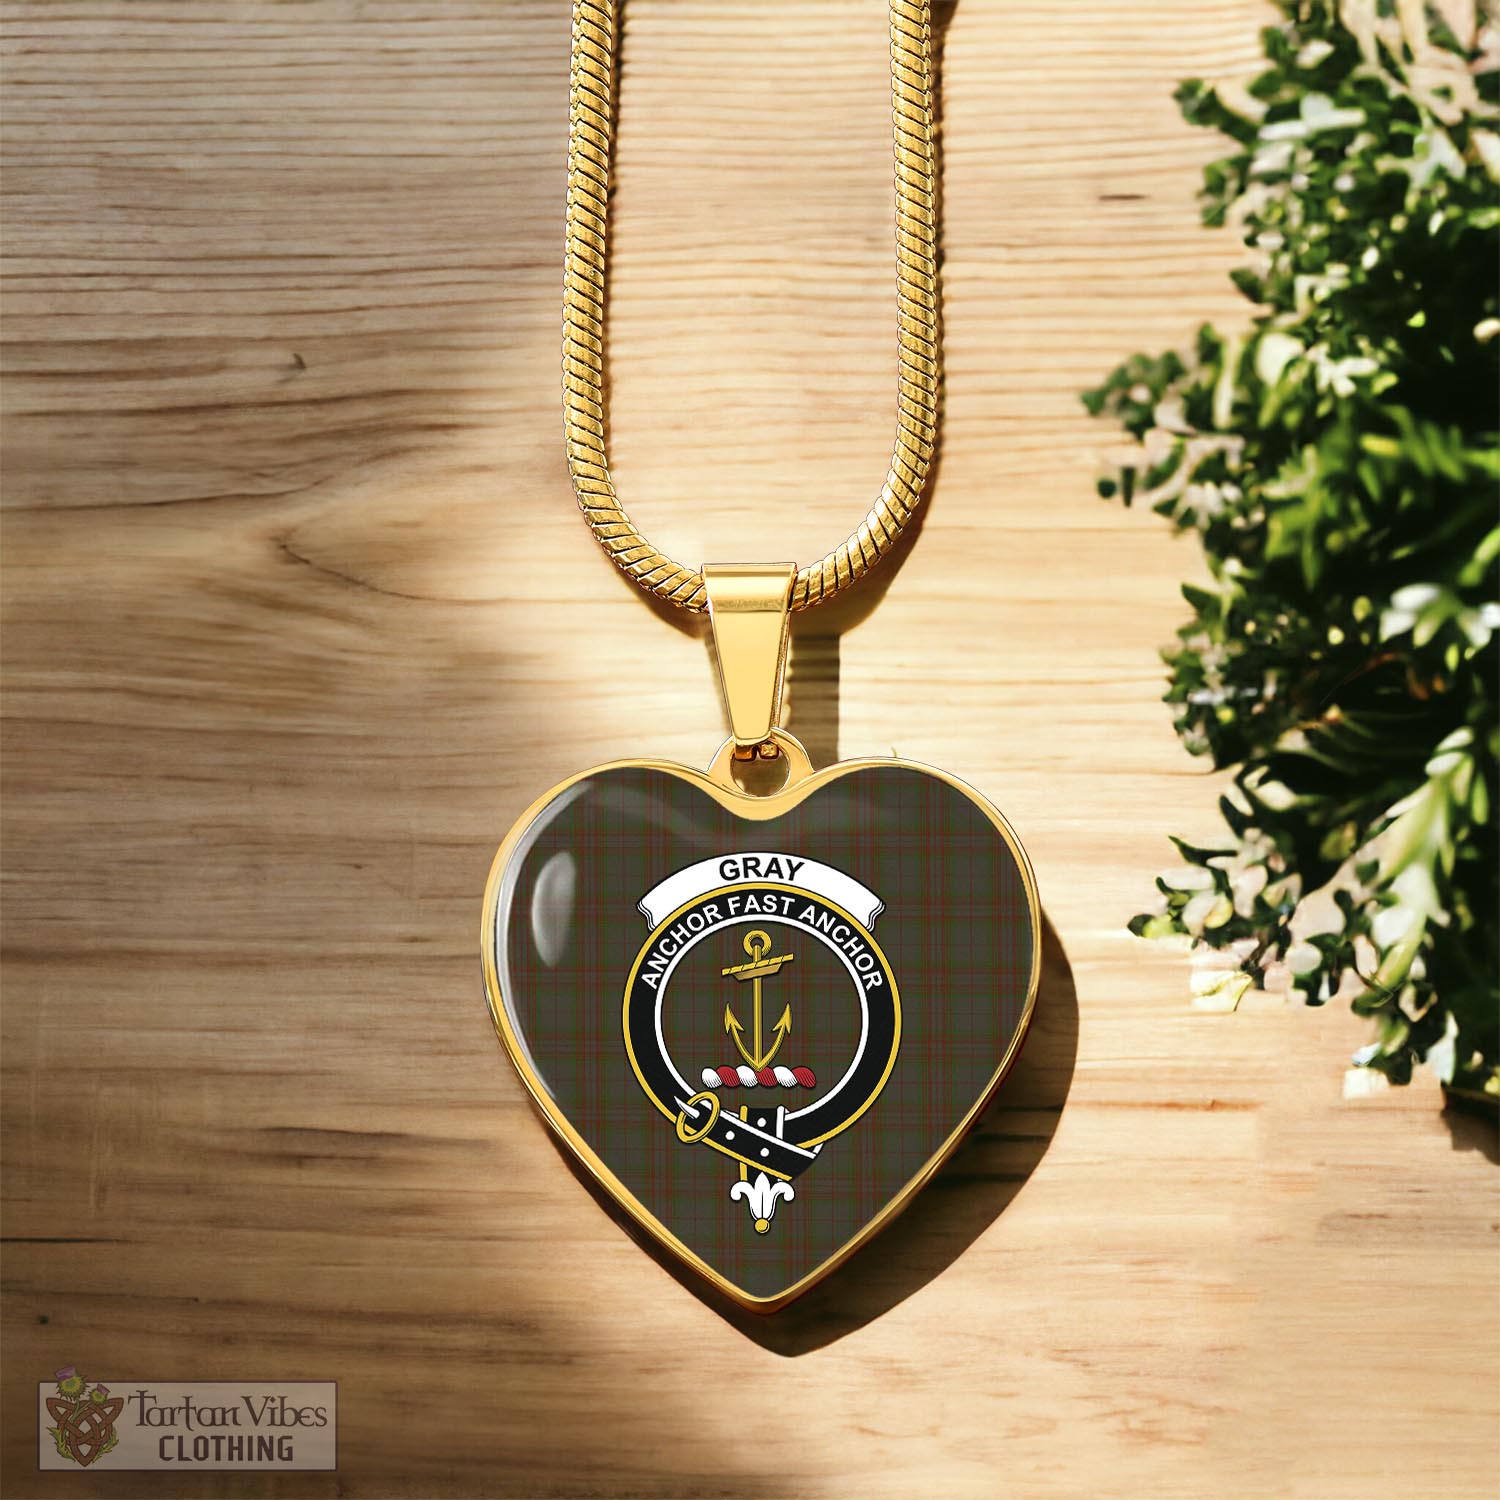 Tartan Vibes Clothing Gray Tartan Heart Necklace with Family Crest